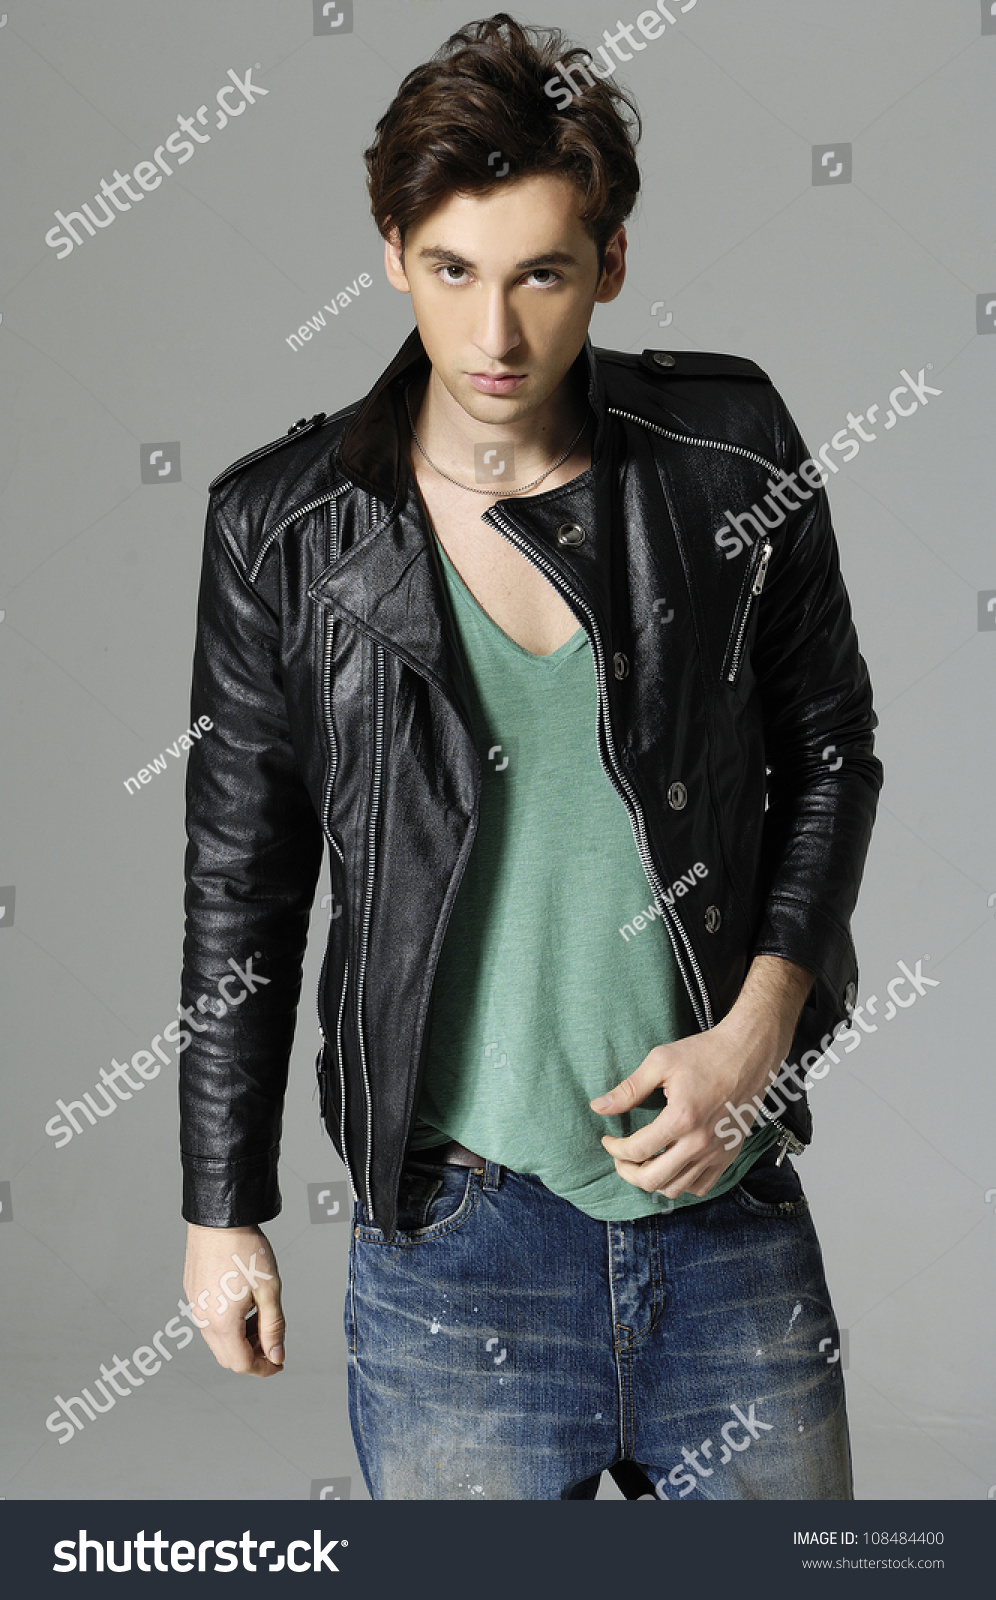 Handsome Young Man Tshirt Jeans Leather Stock Photo 108484400 ...